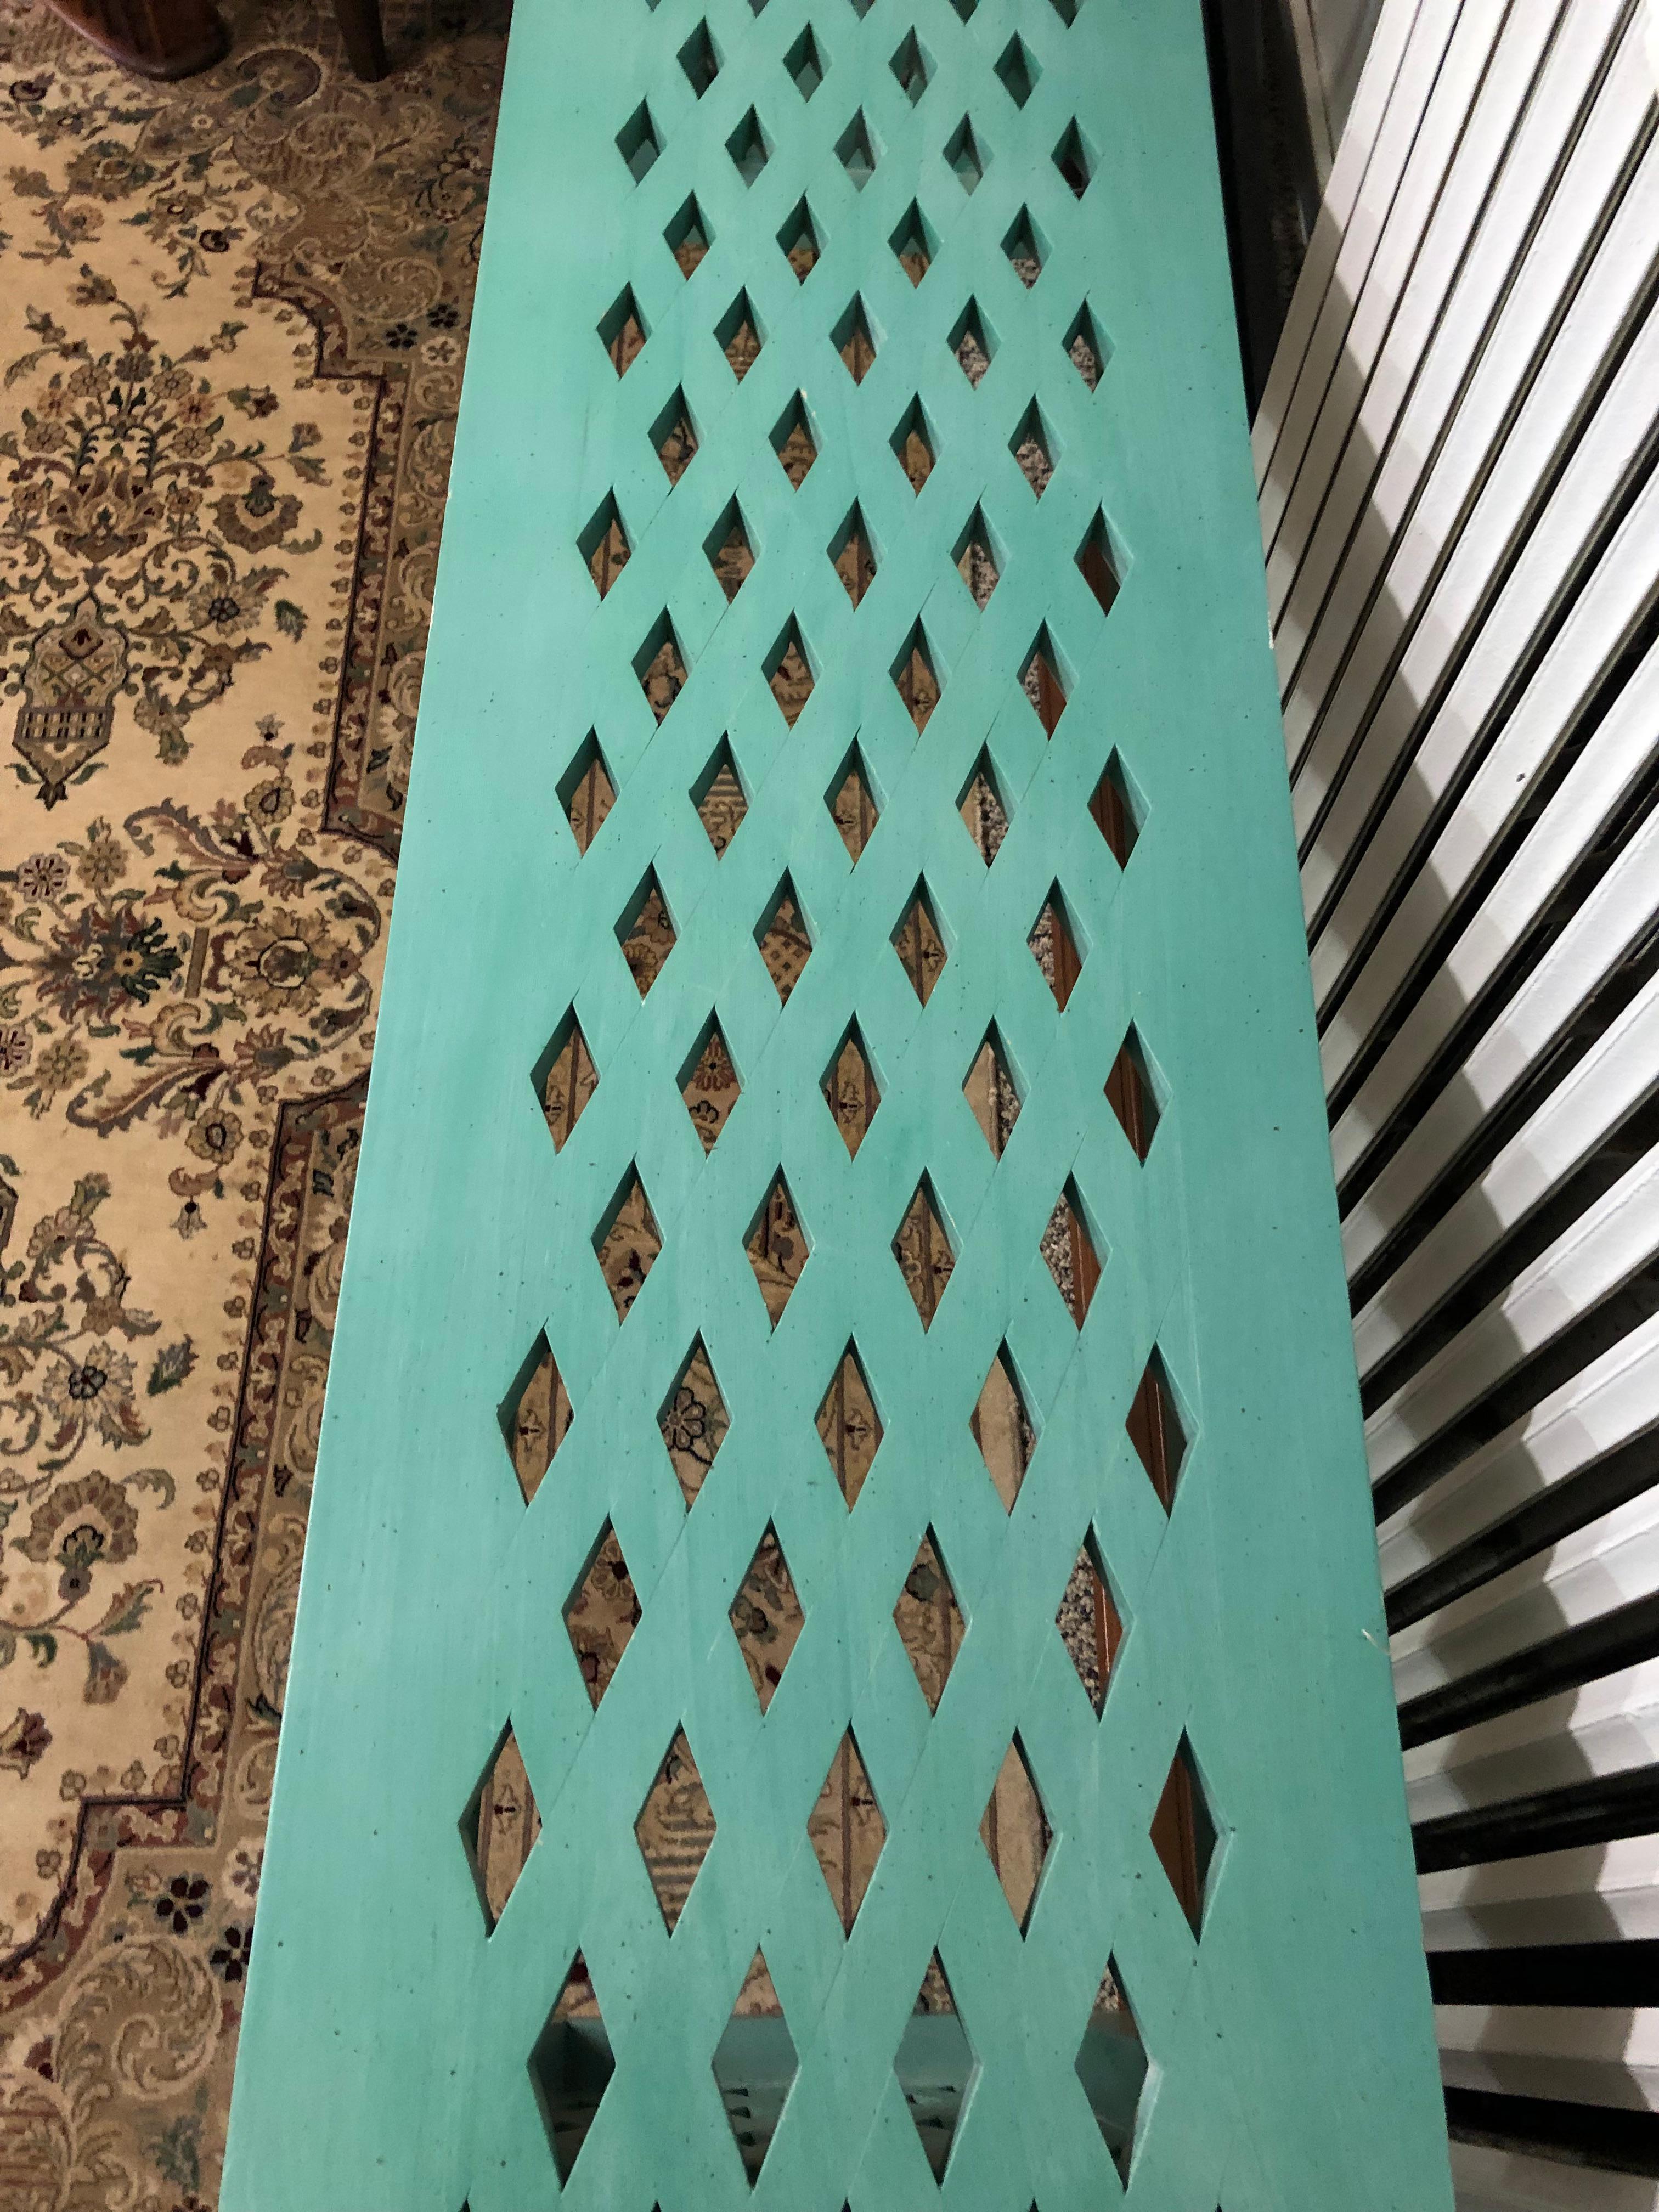 Fabulous vintage Mid-Century Modern Parsons style long console table having cut out diamond pattern on top and sides and painted a sensational turquoise aqua. Signed underside as shown in photo.